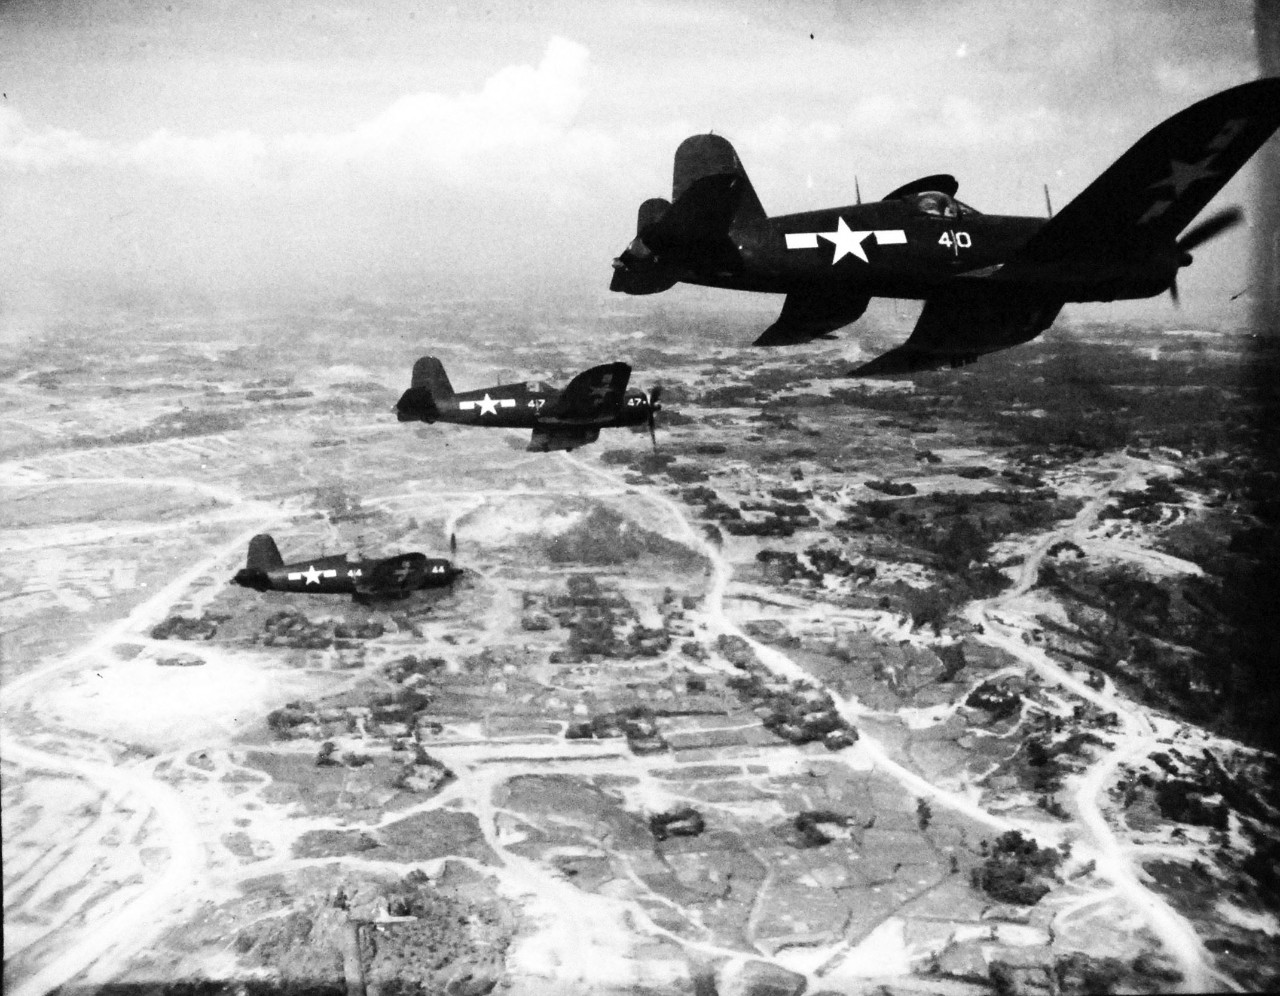 127-GW-524-128521:  Vought F4u Corsair, circa 1945.  F4U “Corsairs” of the “Death Rattlers” Fighter Squadron, VMF-323, in various formations on a rocket strike against Japanese positions south of the front lines on Okinawa.  The “Rattlers” were commanded by Major George A. Axtell, Jr, circa 1945.  Official U.S. Marine Corps photograph, now in the collections of the National Archives. 